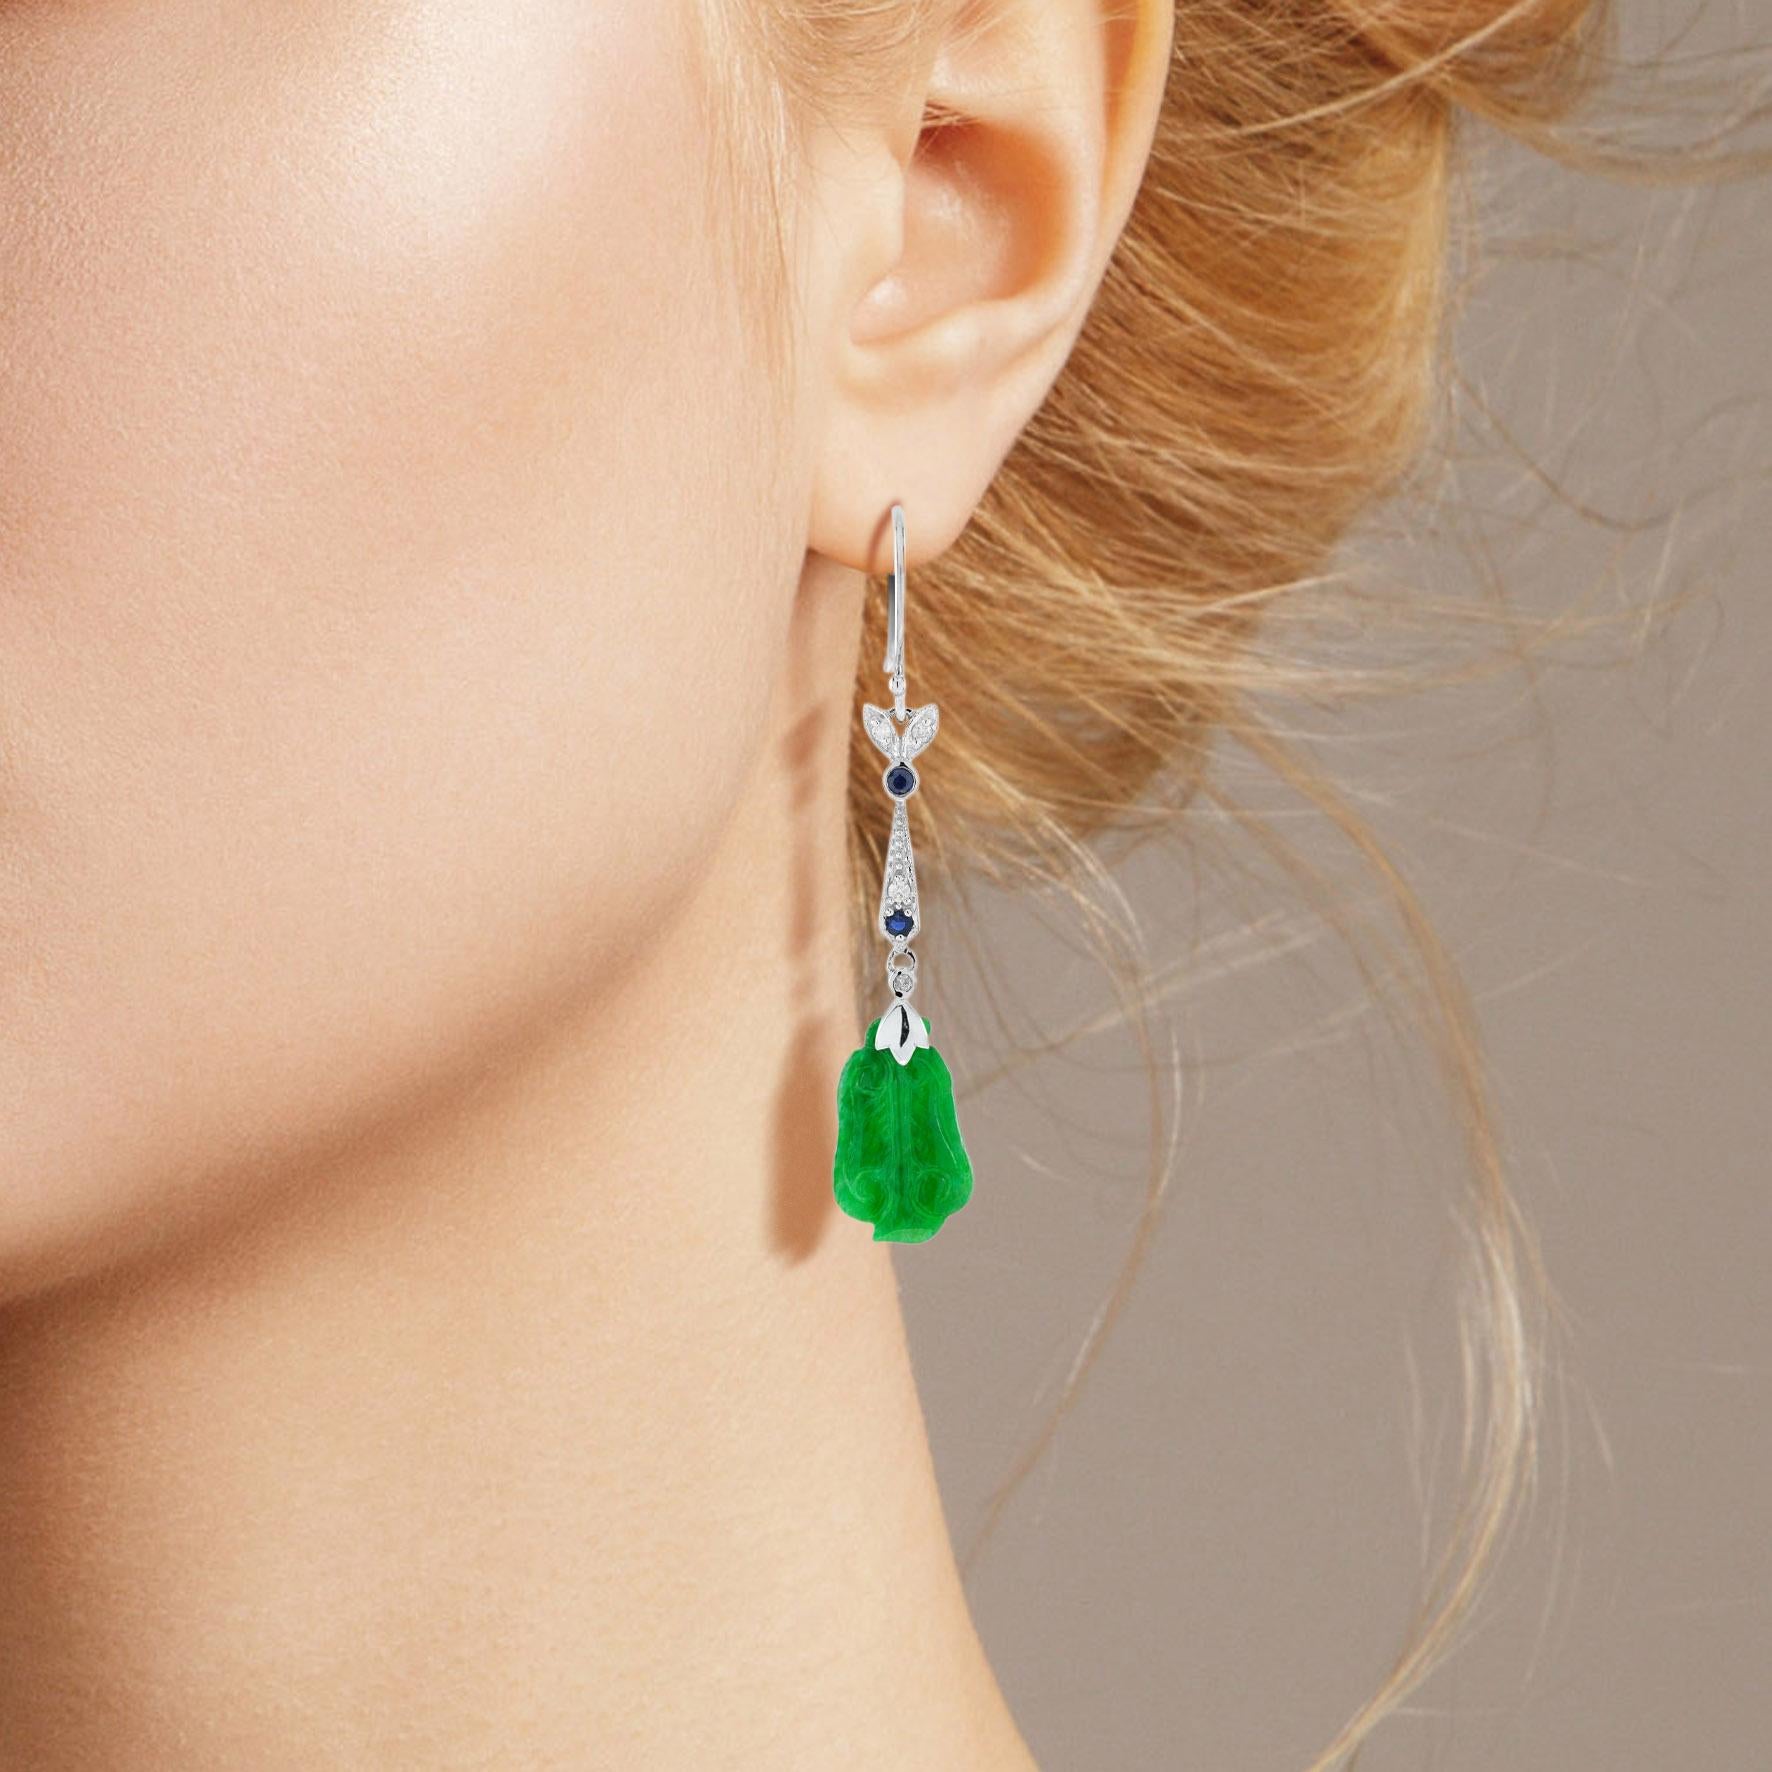 The natural jade in these lovely earrings has some very special shape. Both pieces have a strong green color and well carvings. The jade is suspended in a 9k white gold setting with diamond leaf and round blue sapphires on the top. The earrings